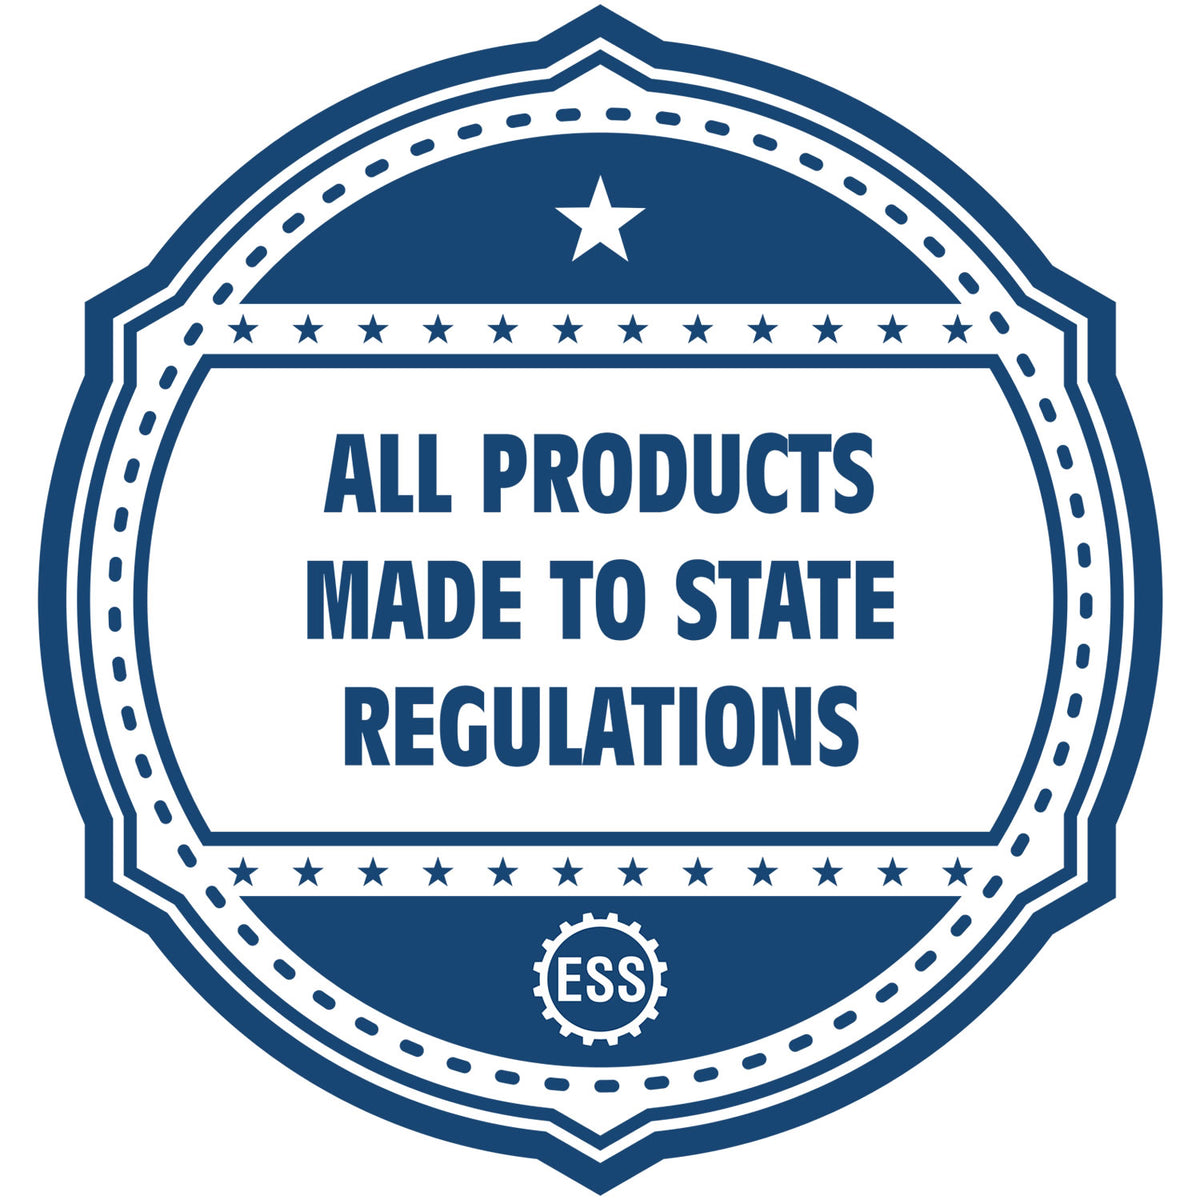 An icon or badge element for the Slim Pre-Inked Washington Architect Seal Stamp showing that this product is made in compliance with state regulations.